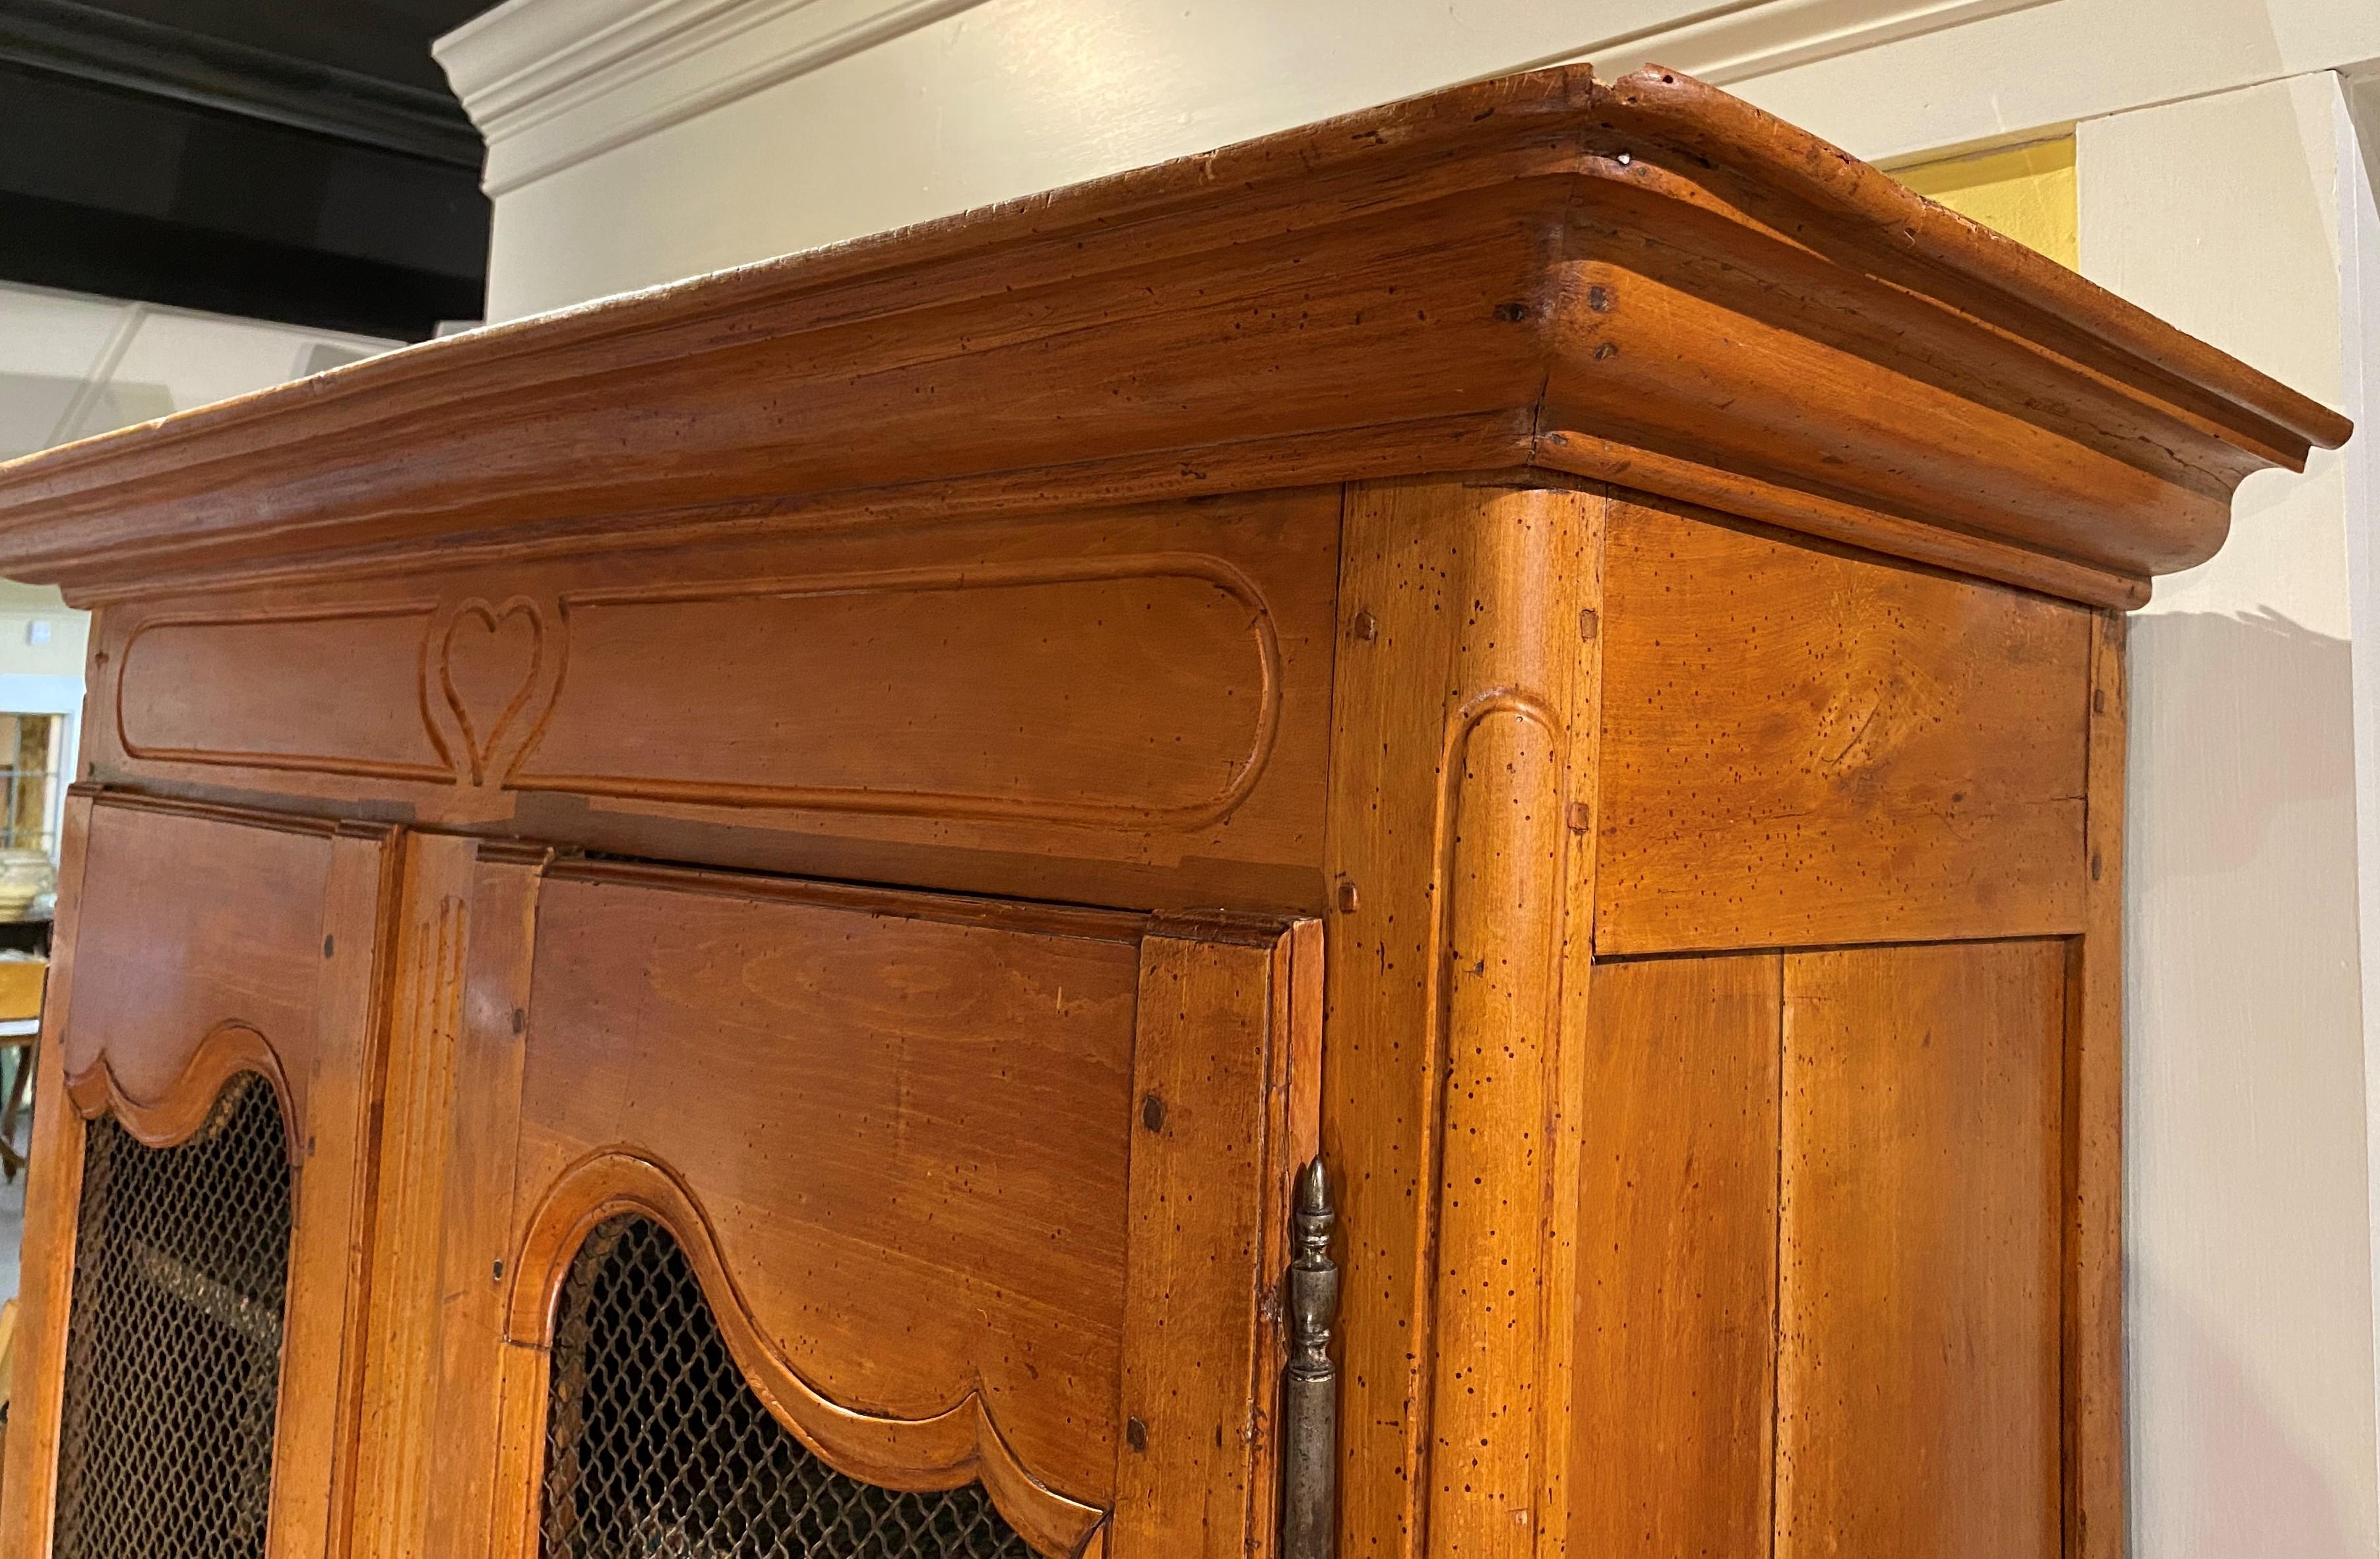 18th / 19th Century French Provincial Fruitwood Armoire with Wire Front Doors In Good Condition For Sale In Milford, NH